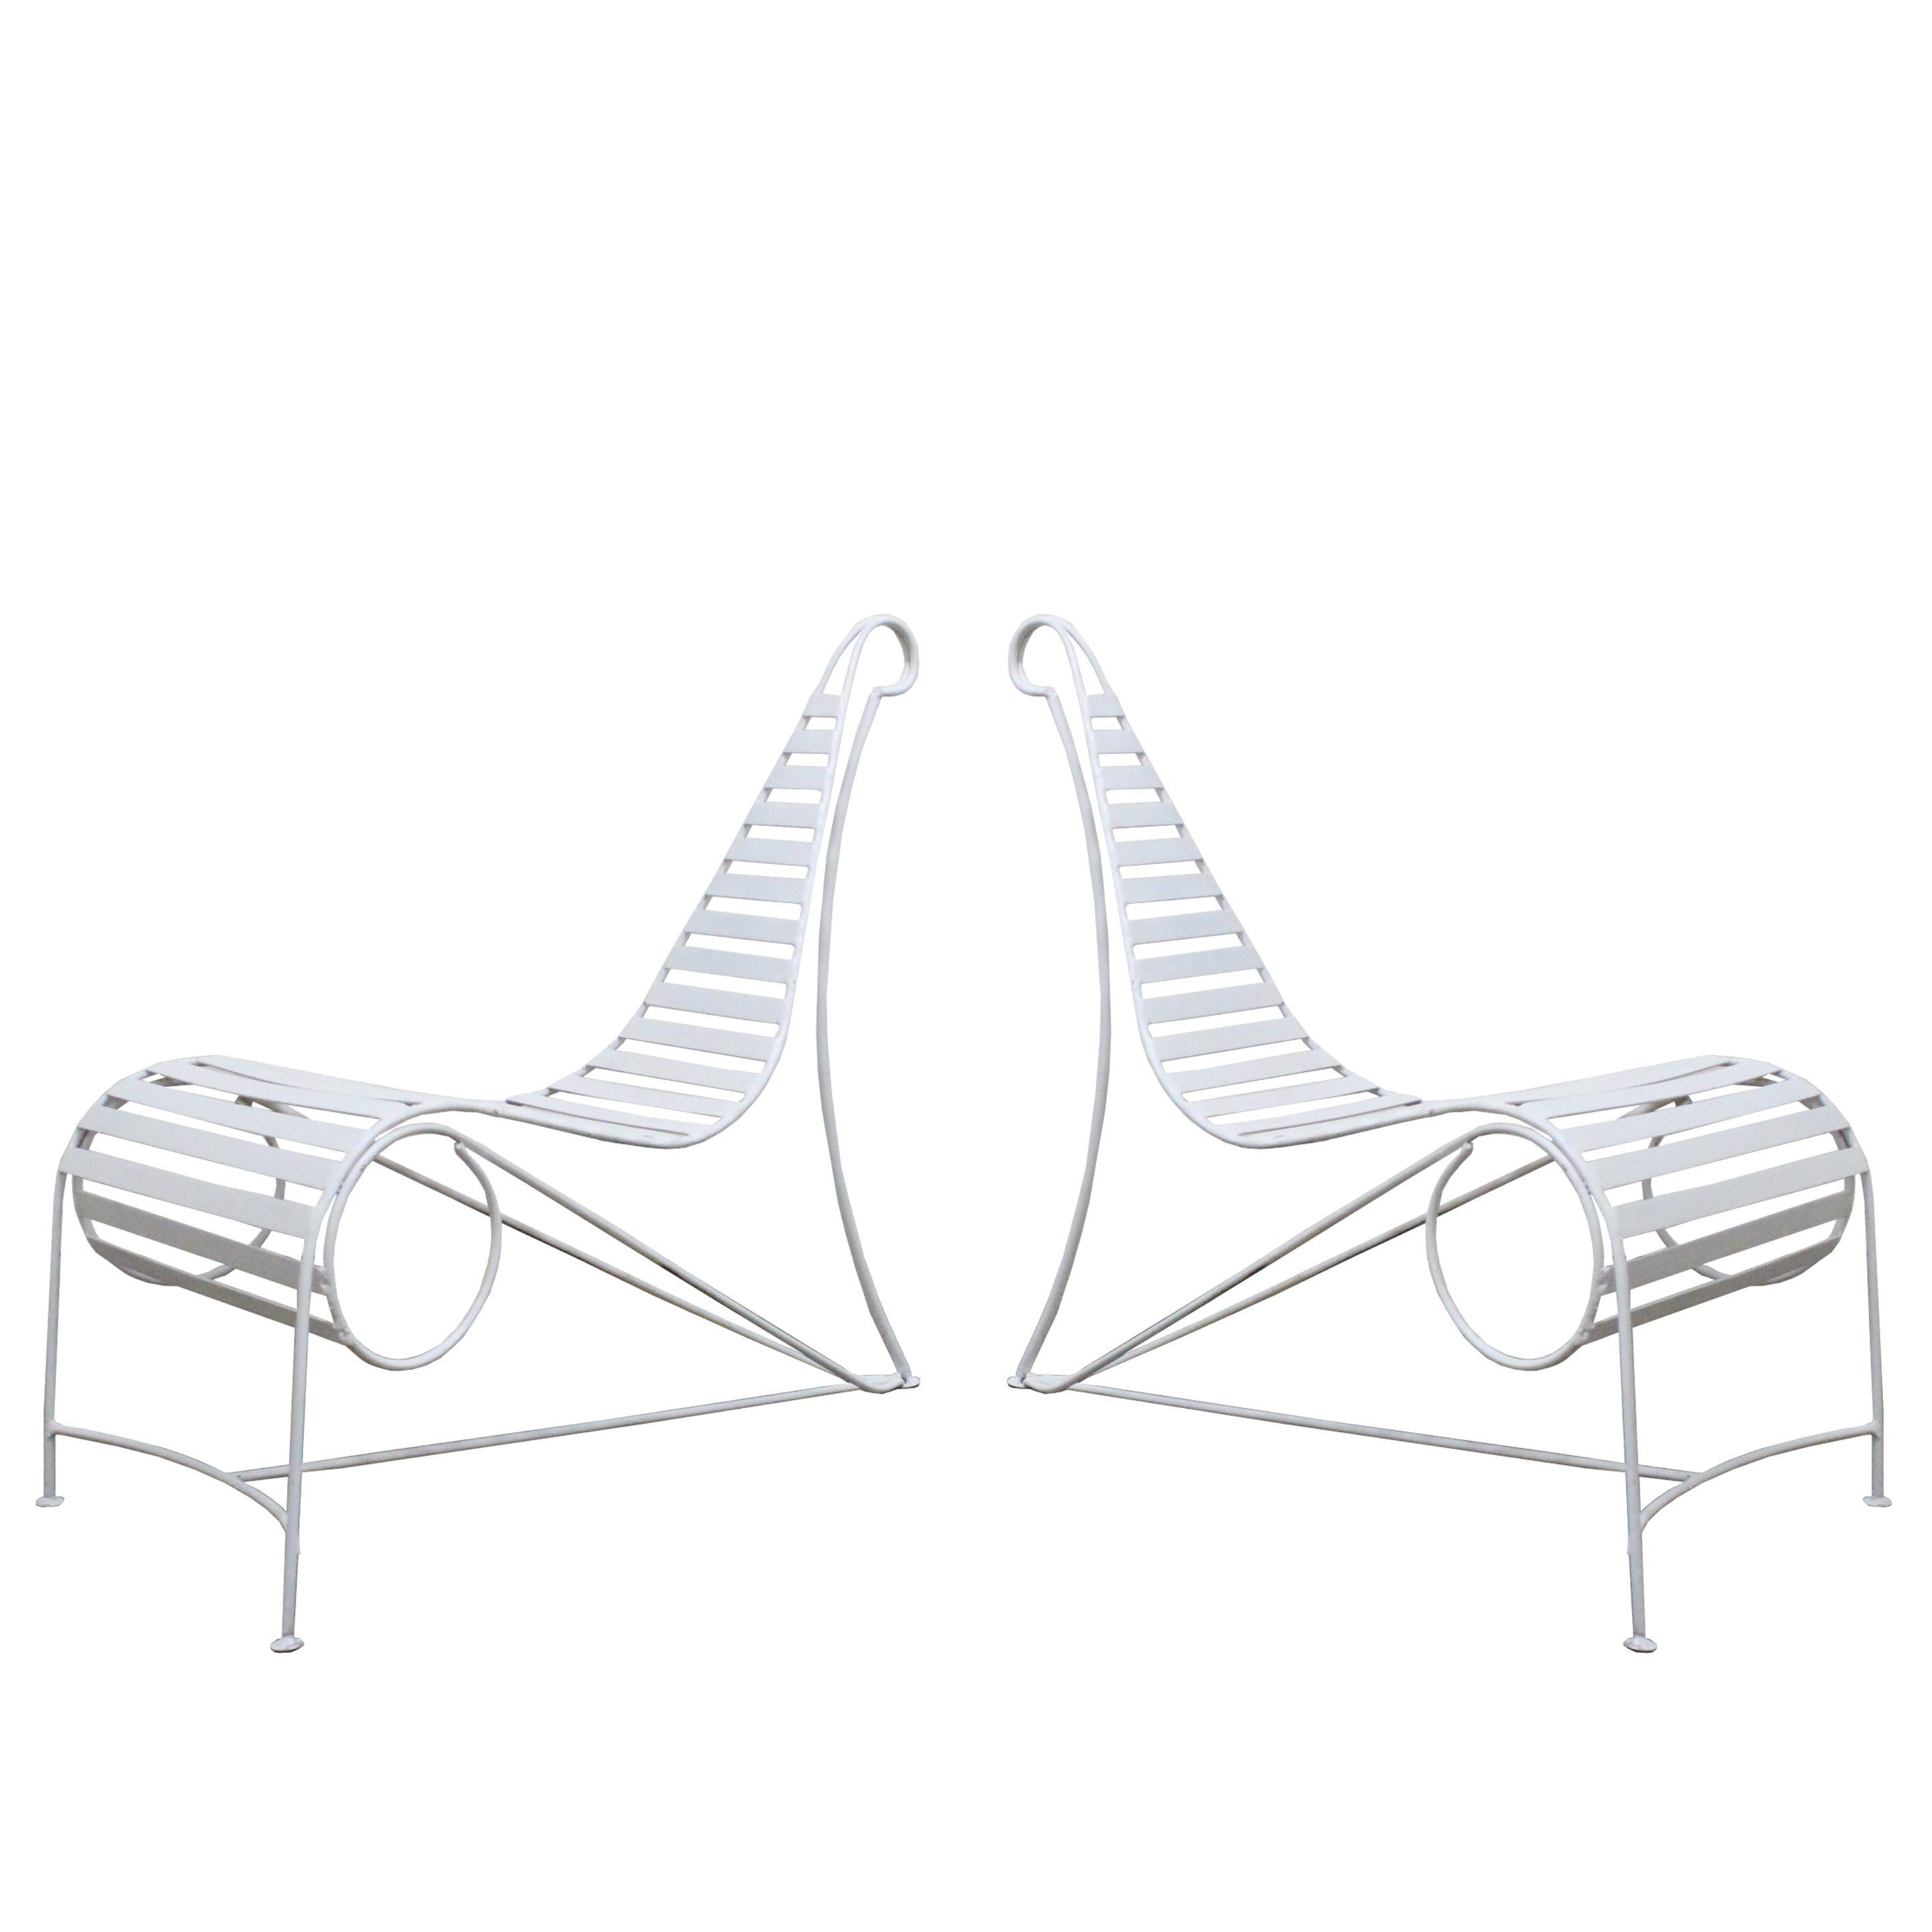 Pair of Lounge Chairs in the Style of the "Spine" Chair by André Durbreuil